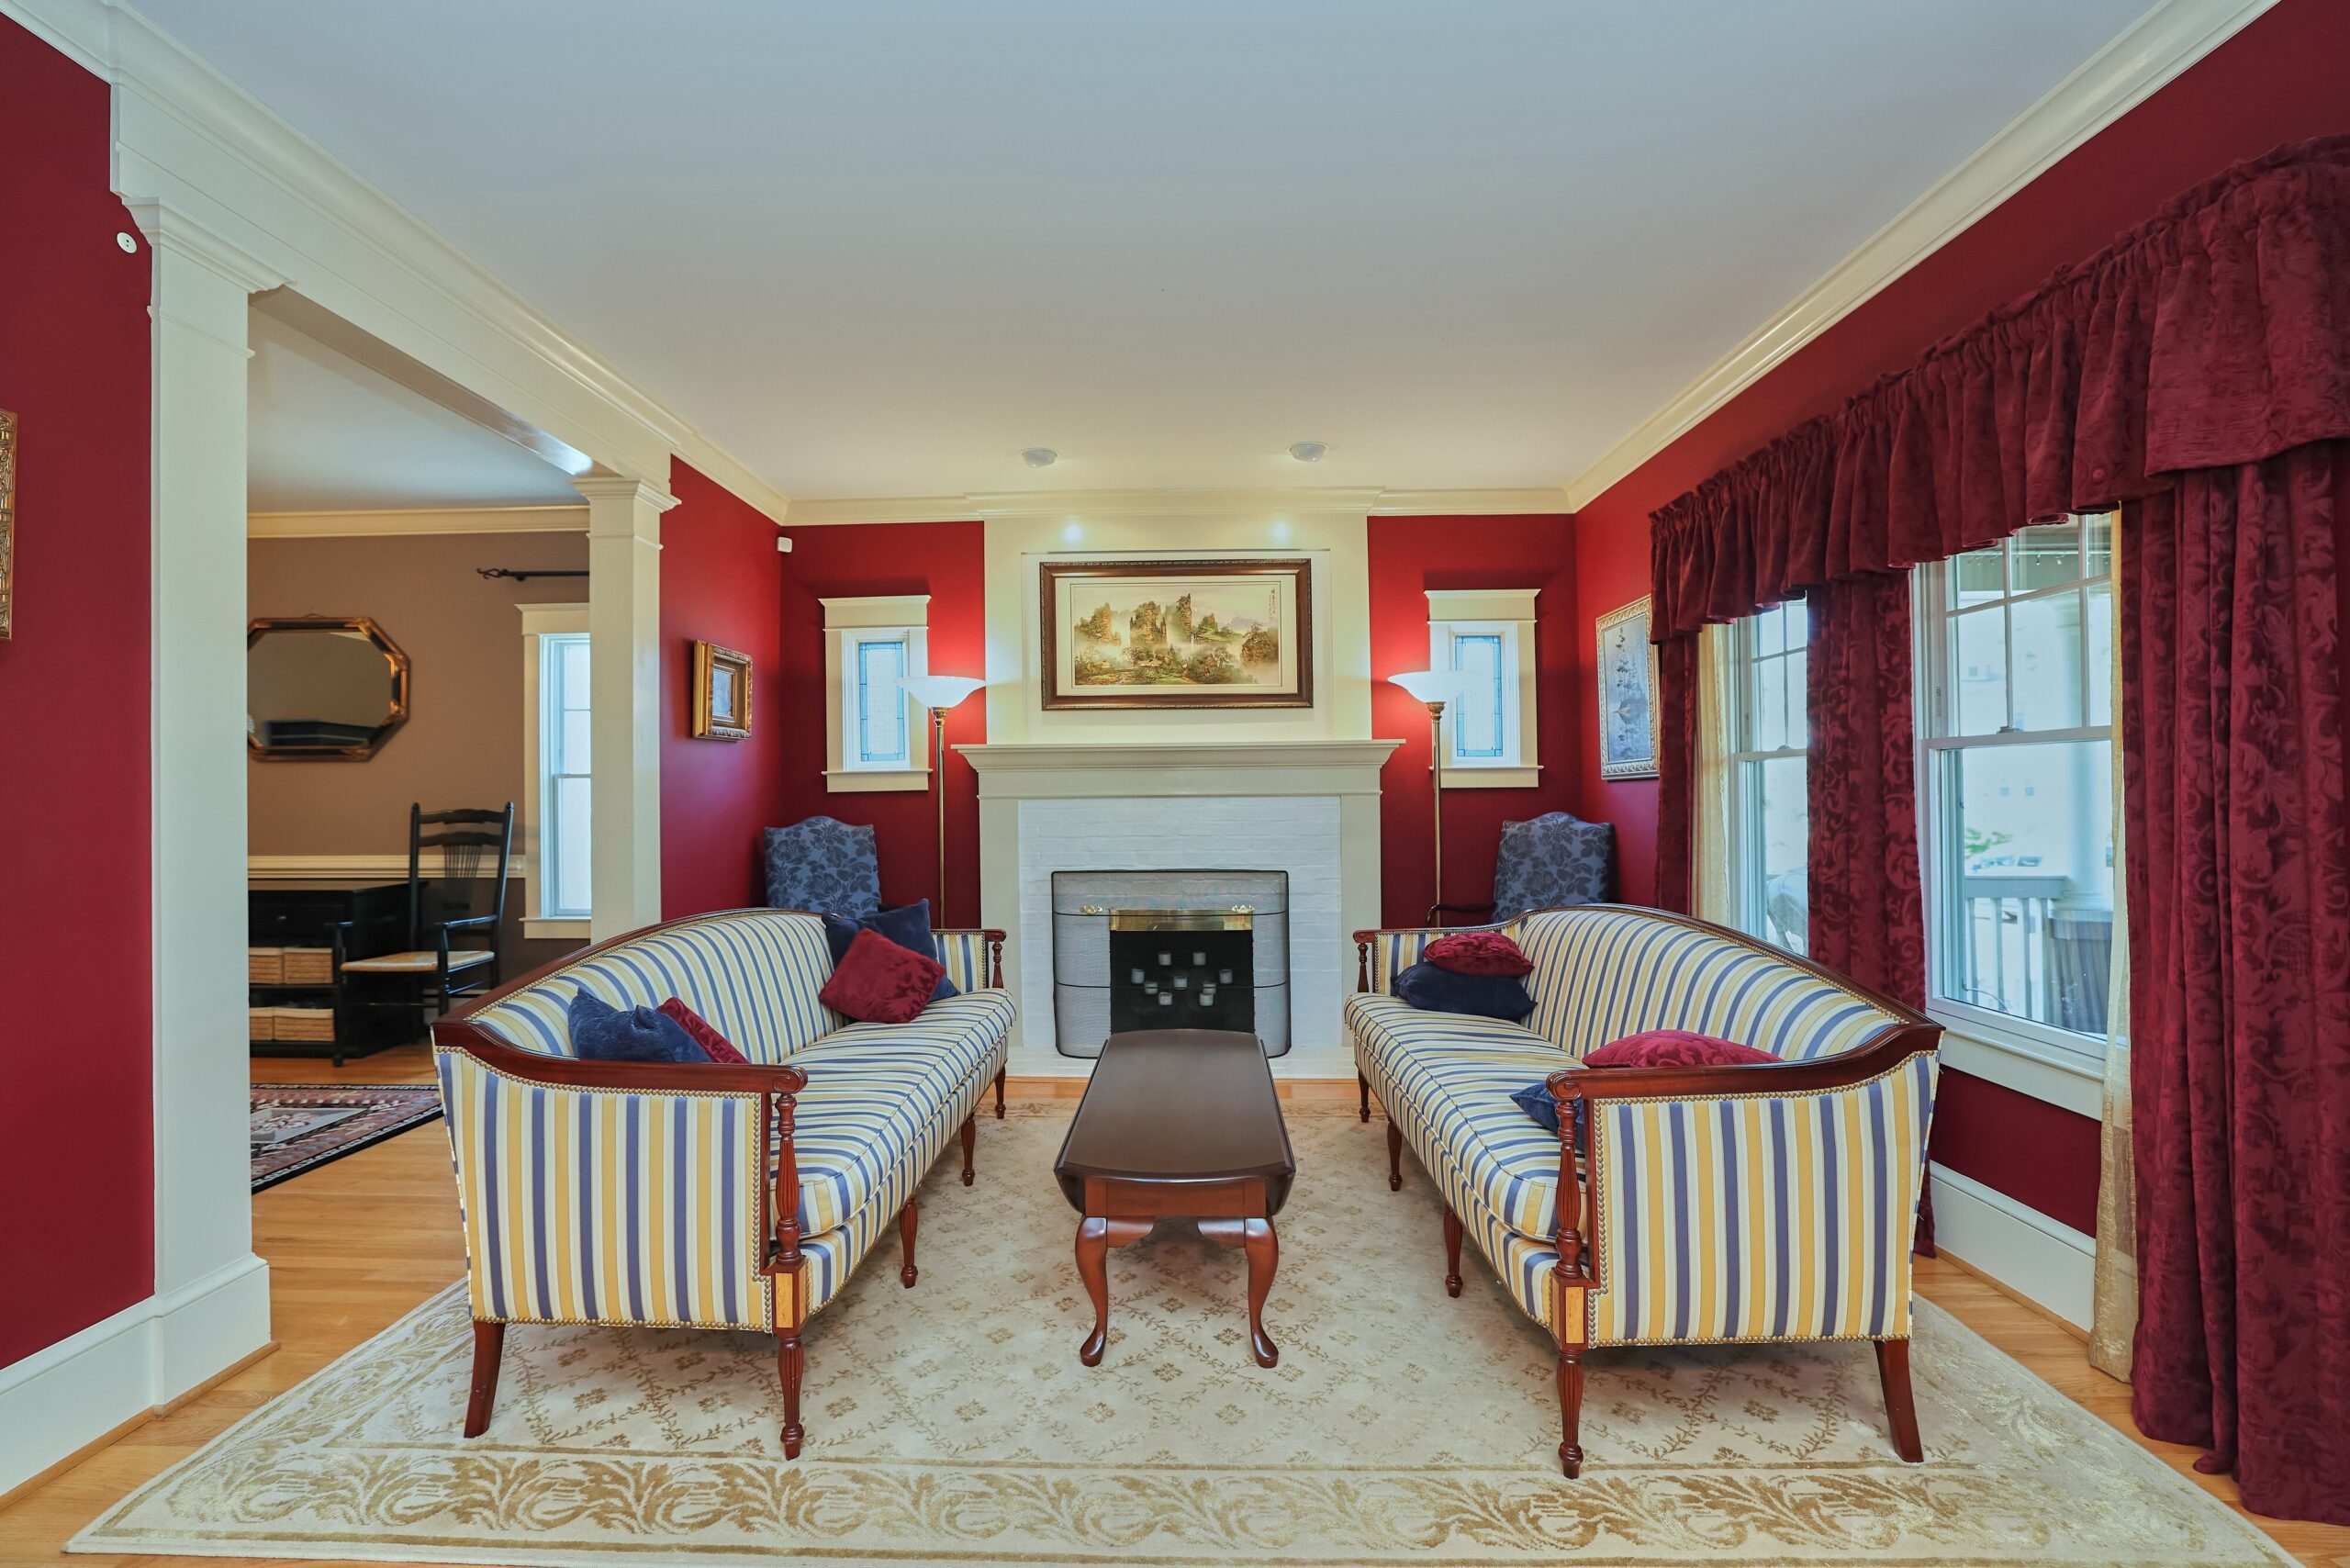 Professional interior photo of 819 N Fillmore St - Showing the front formal sitting room with red jewel-toned walls, curtains and throw pillows looking directly at a wood fireplace